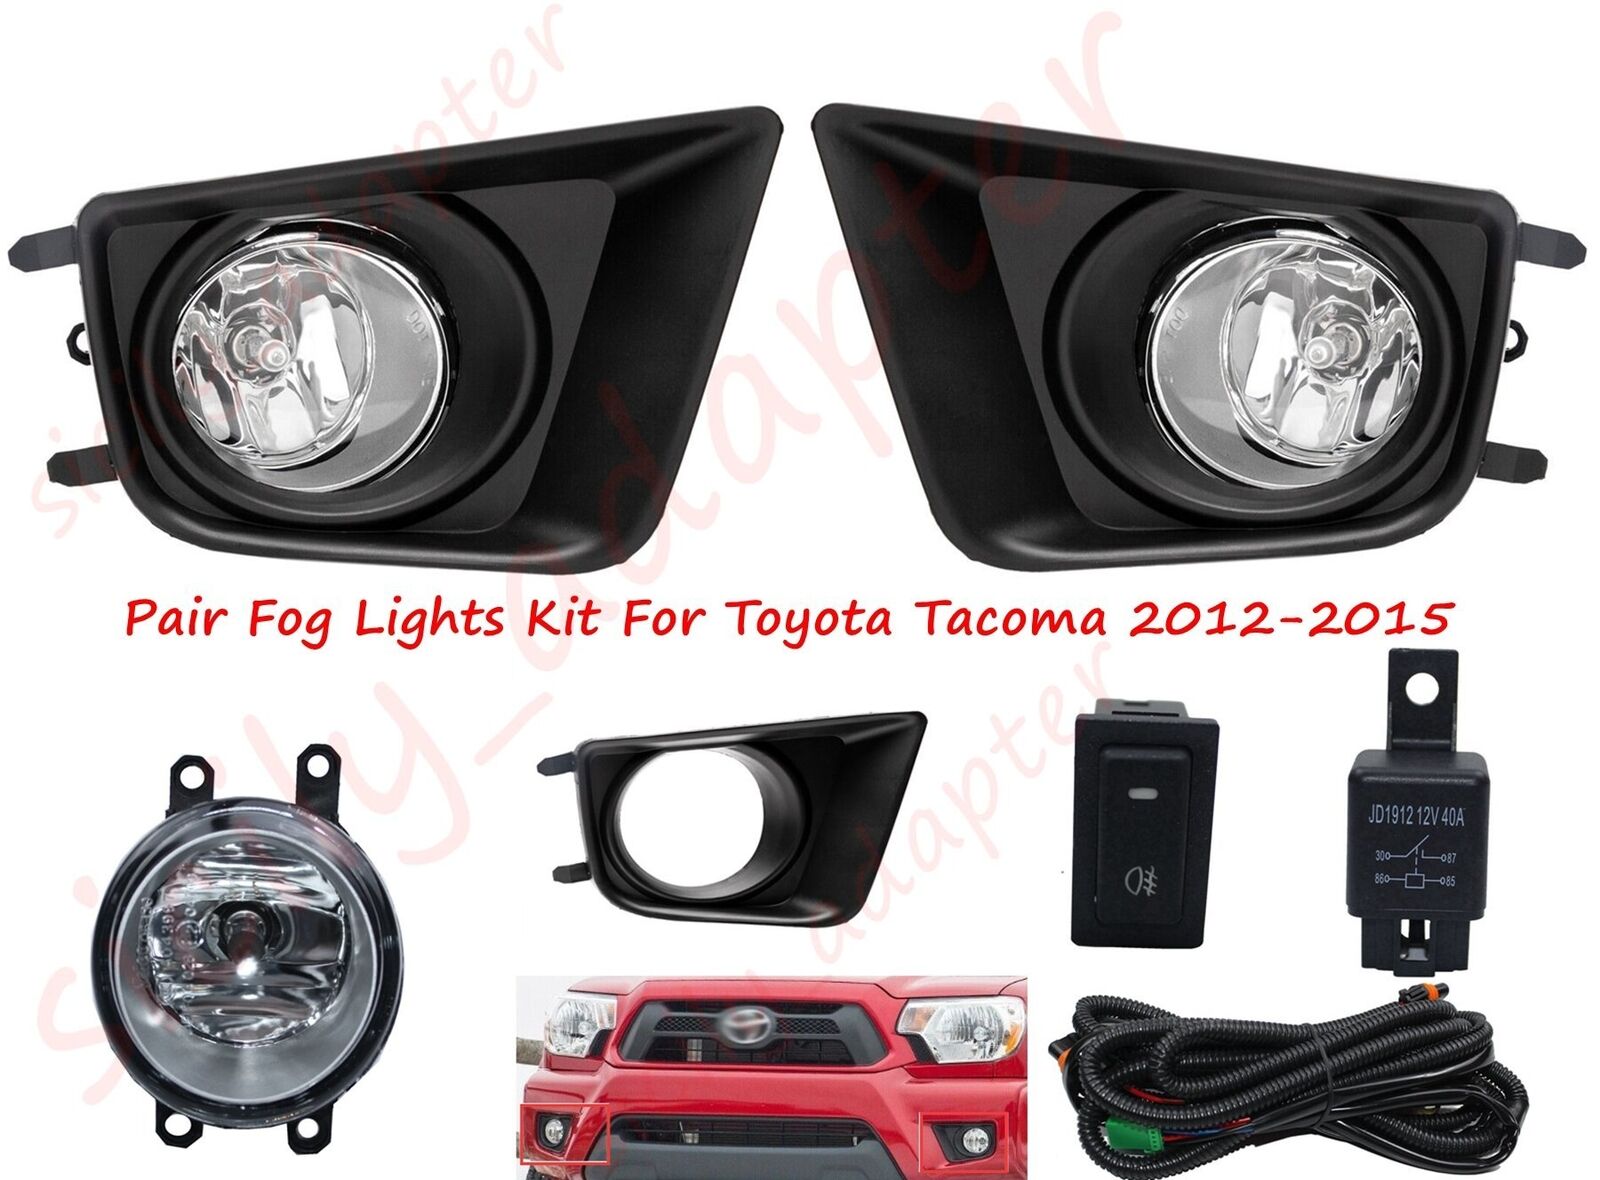 Pair Front Bumper Fog Lights Kit For Toyota Tacoma 2015-2012 W/ Cover/Switch US